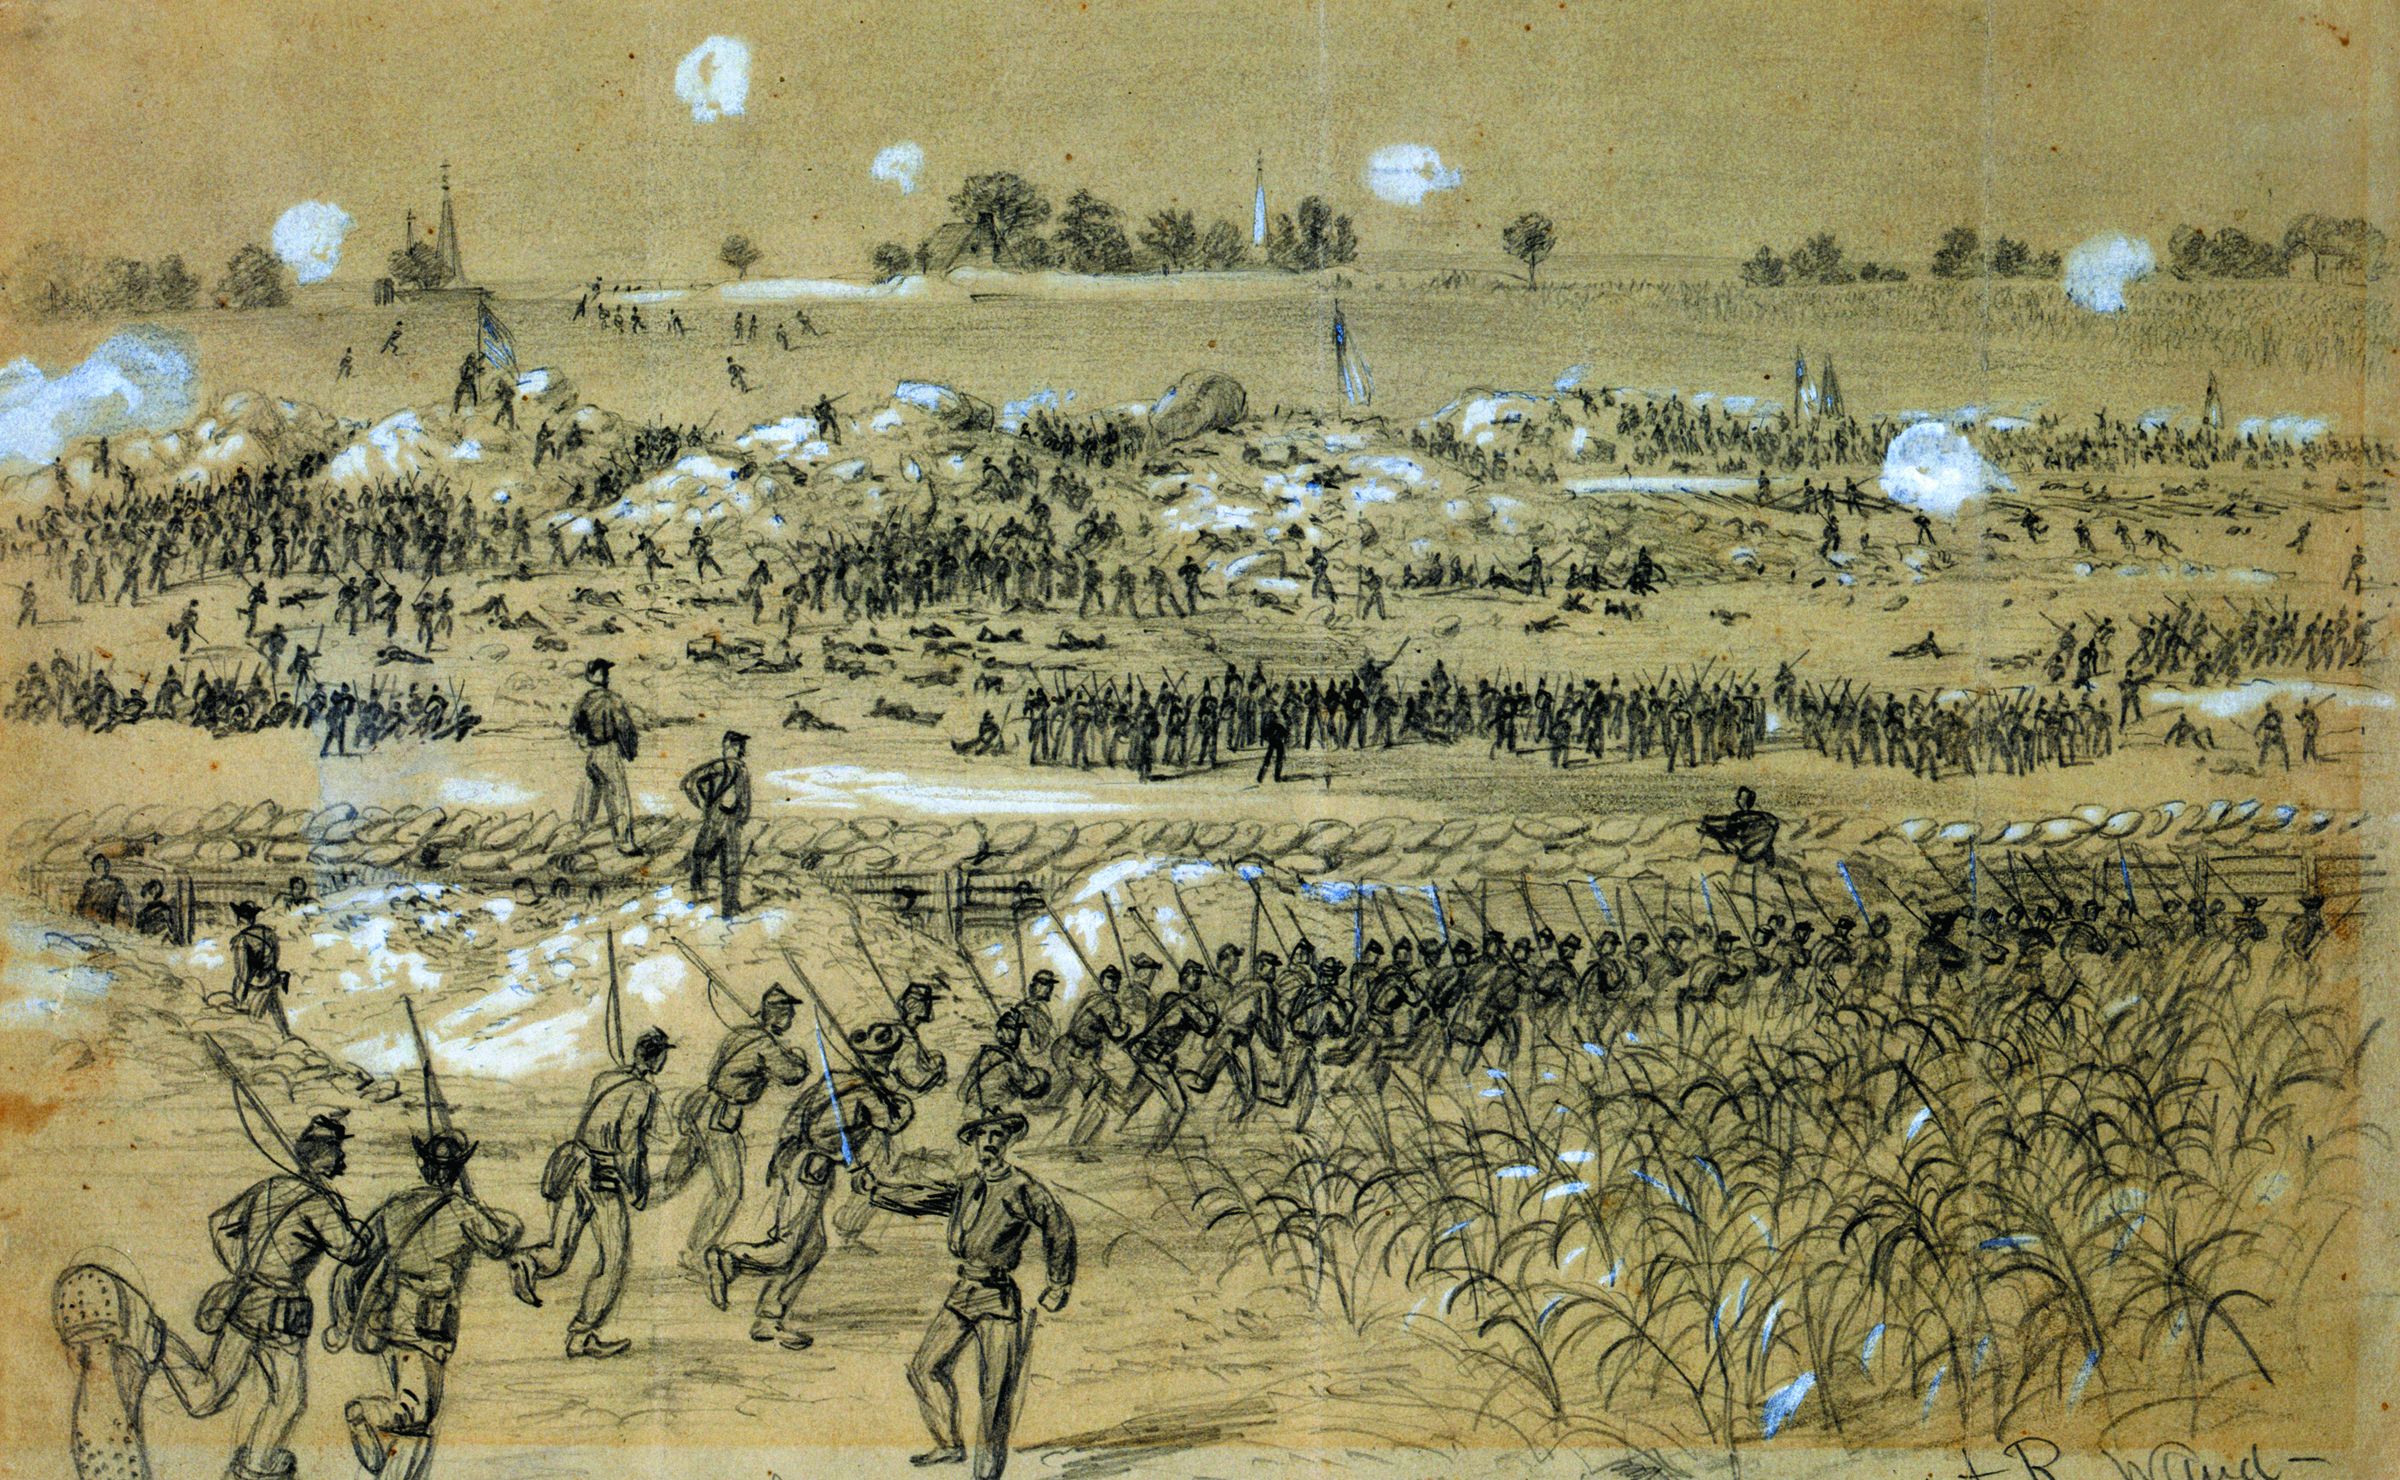 Union soldiers advance into the Crater after the explosion. In the middle distance are mounds of dirt thrown up by the literally ground-shaking explosion. Beyond are Cemetery Hill and the Confederate inner works. Also by Waud.